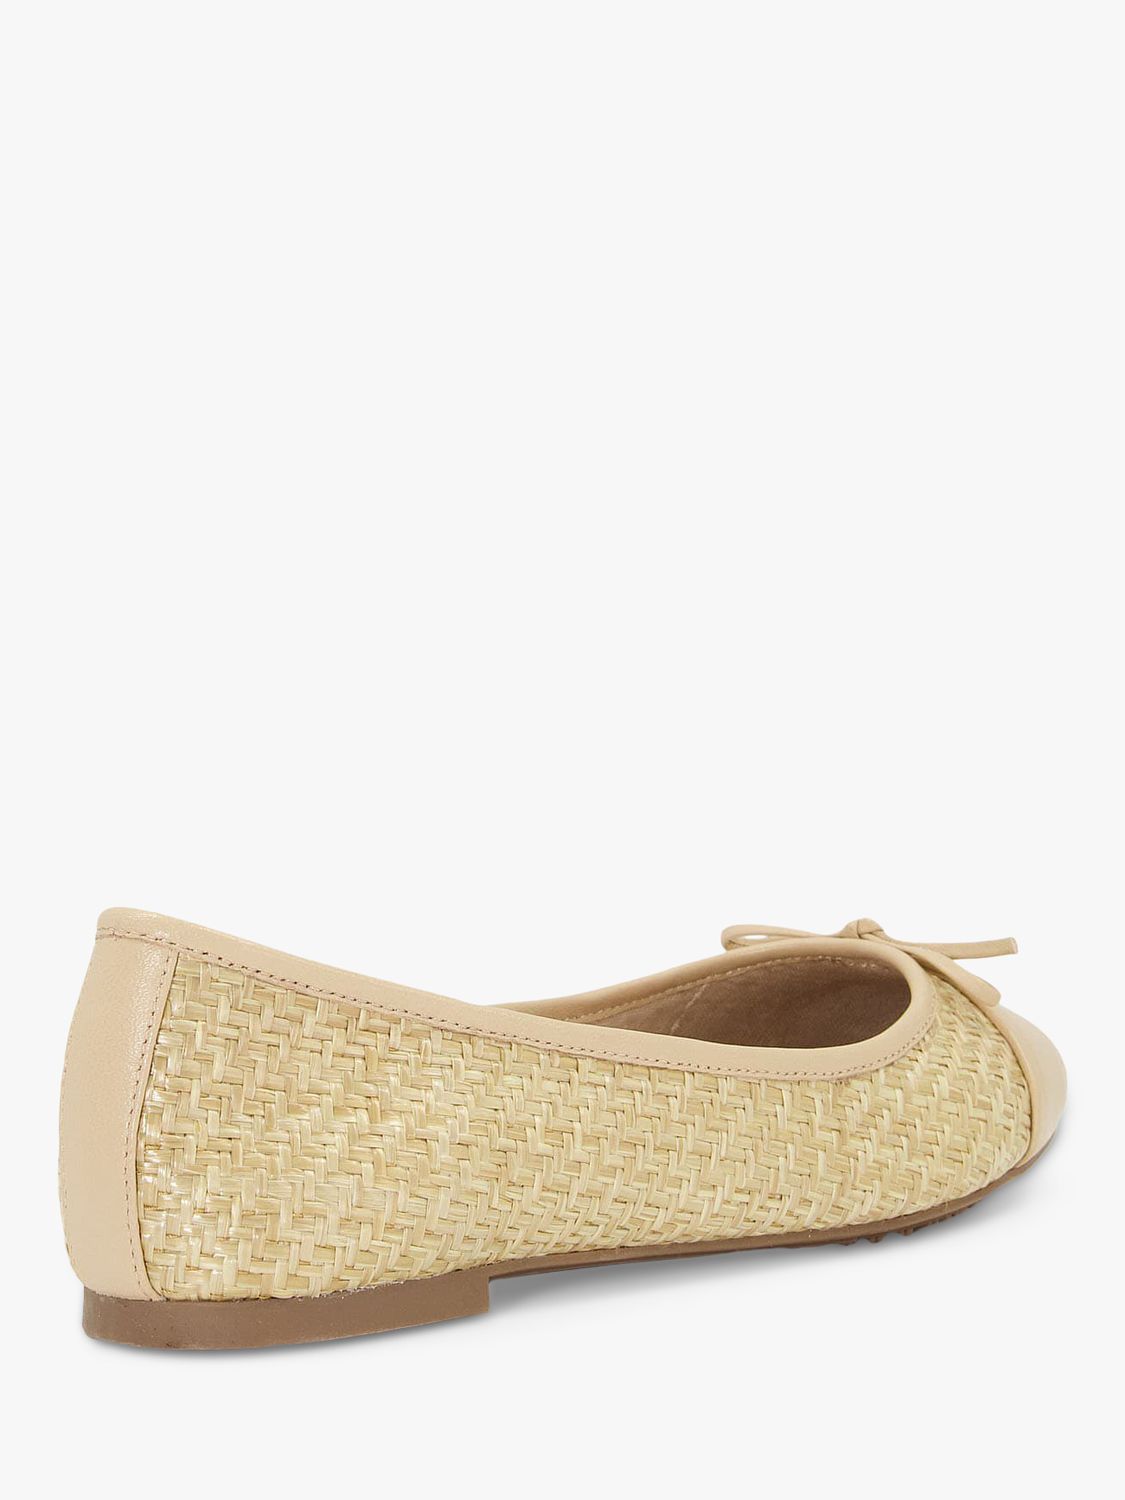 John Lewis Holly Leather Woven Ballerina Pumps, Gold at John Lewis